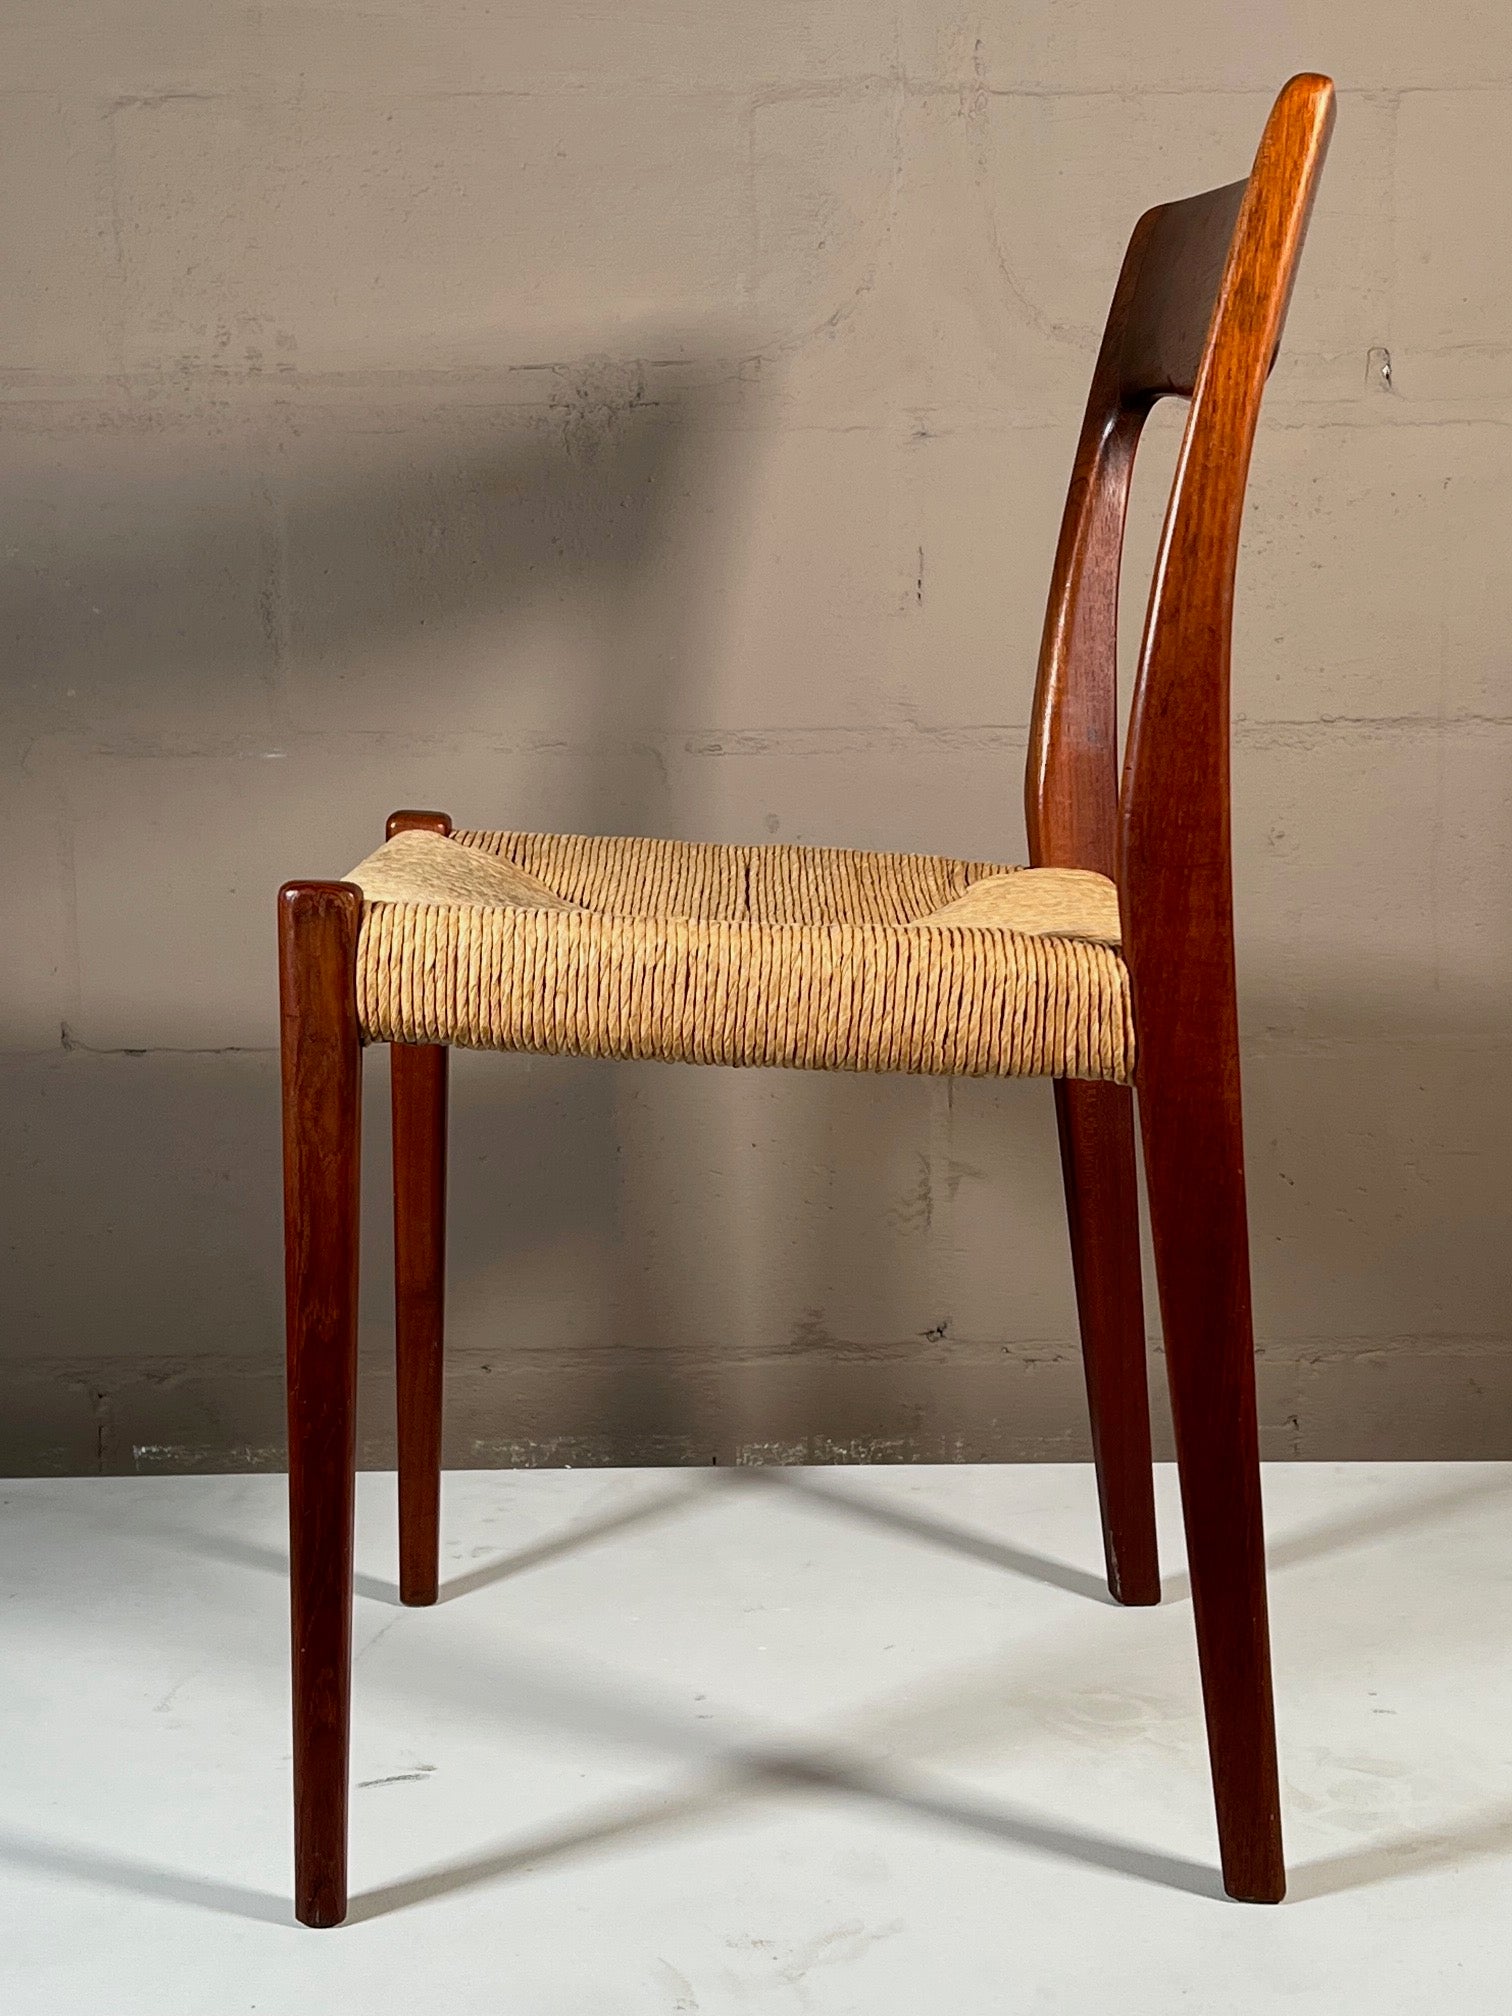 A sculptural, classic Danish style chair by Svegards Markaryd, Sweden, 1950's. Beautiful patina, teak darkened with age. Great details, original papercord seat. This chair looks great from every angle.